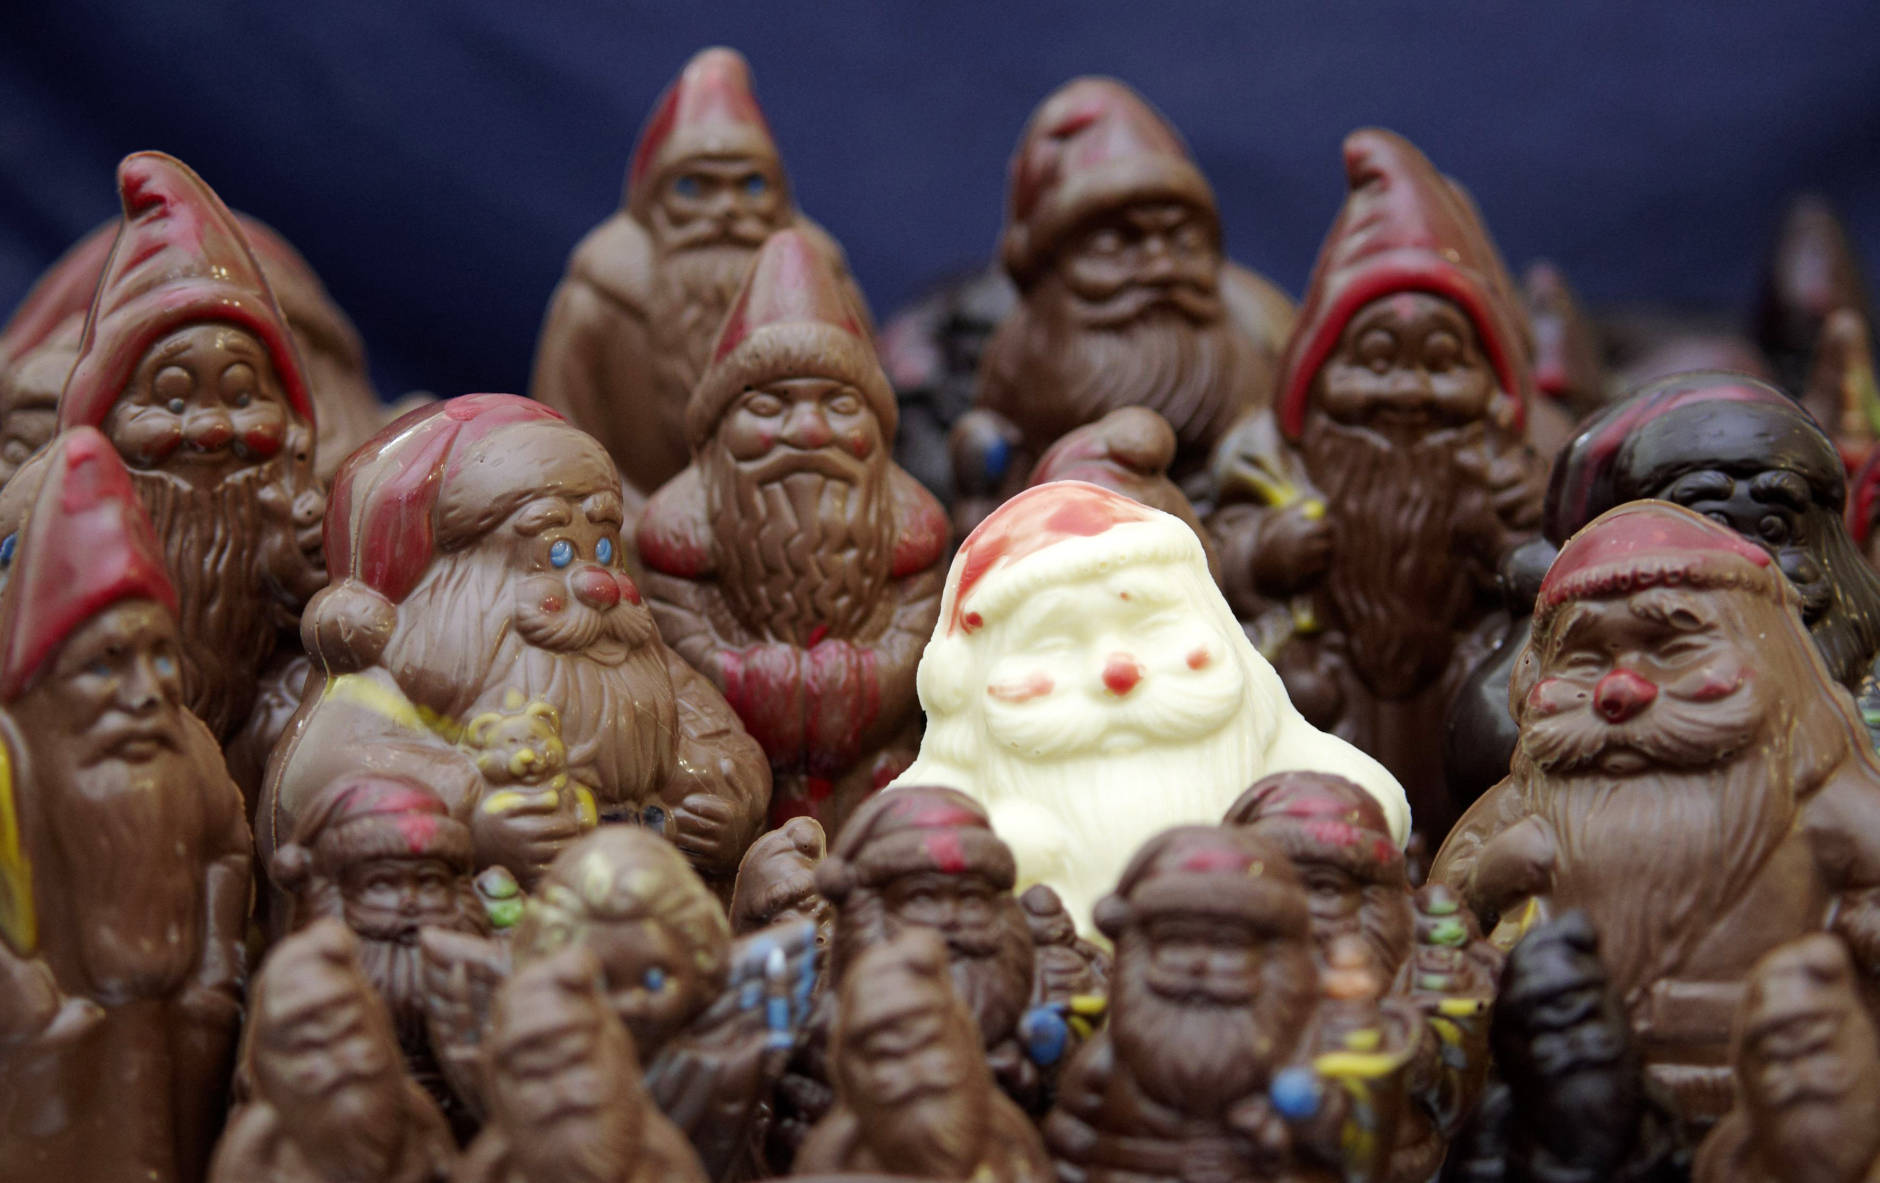 Chocolate Santa Claus are seen in a chocolate manufactory in Rostock, northern Germany, Monday, Dec. 14, 2009. (AP Photo/Thomas Haentzschel)